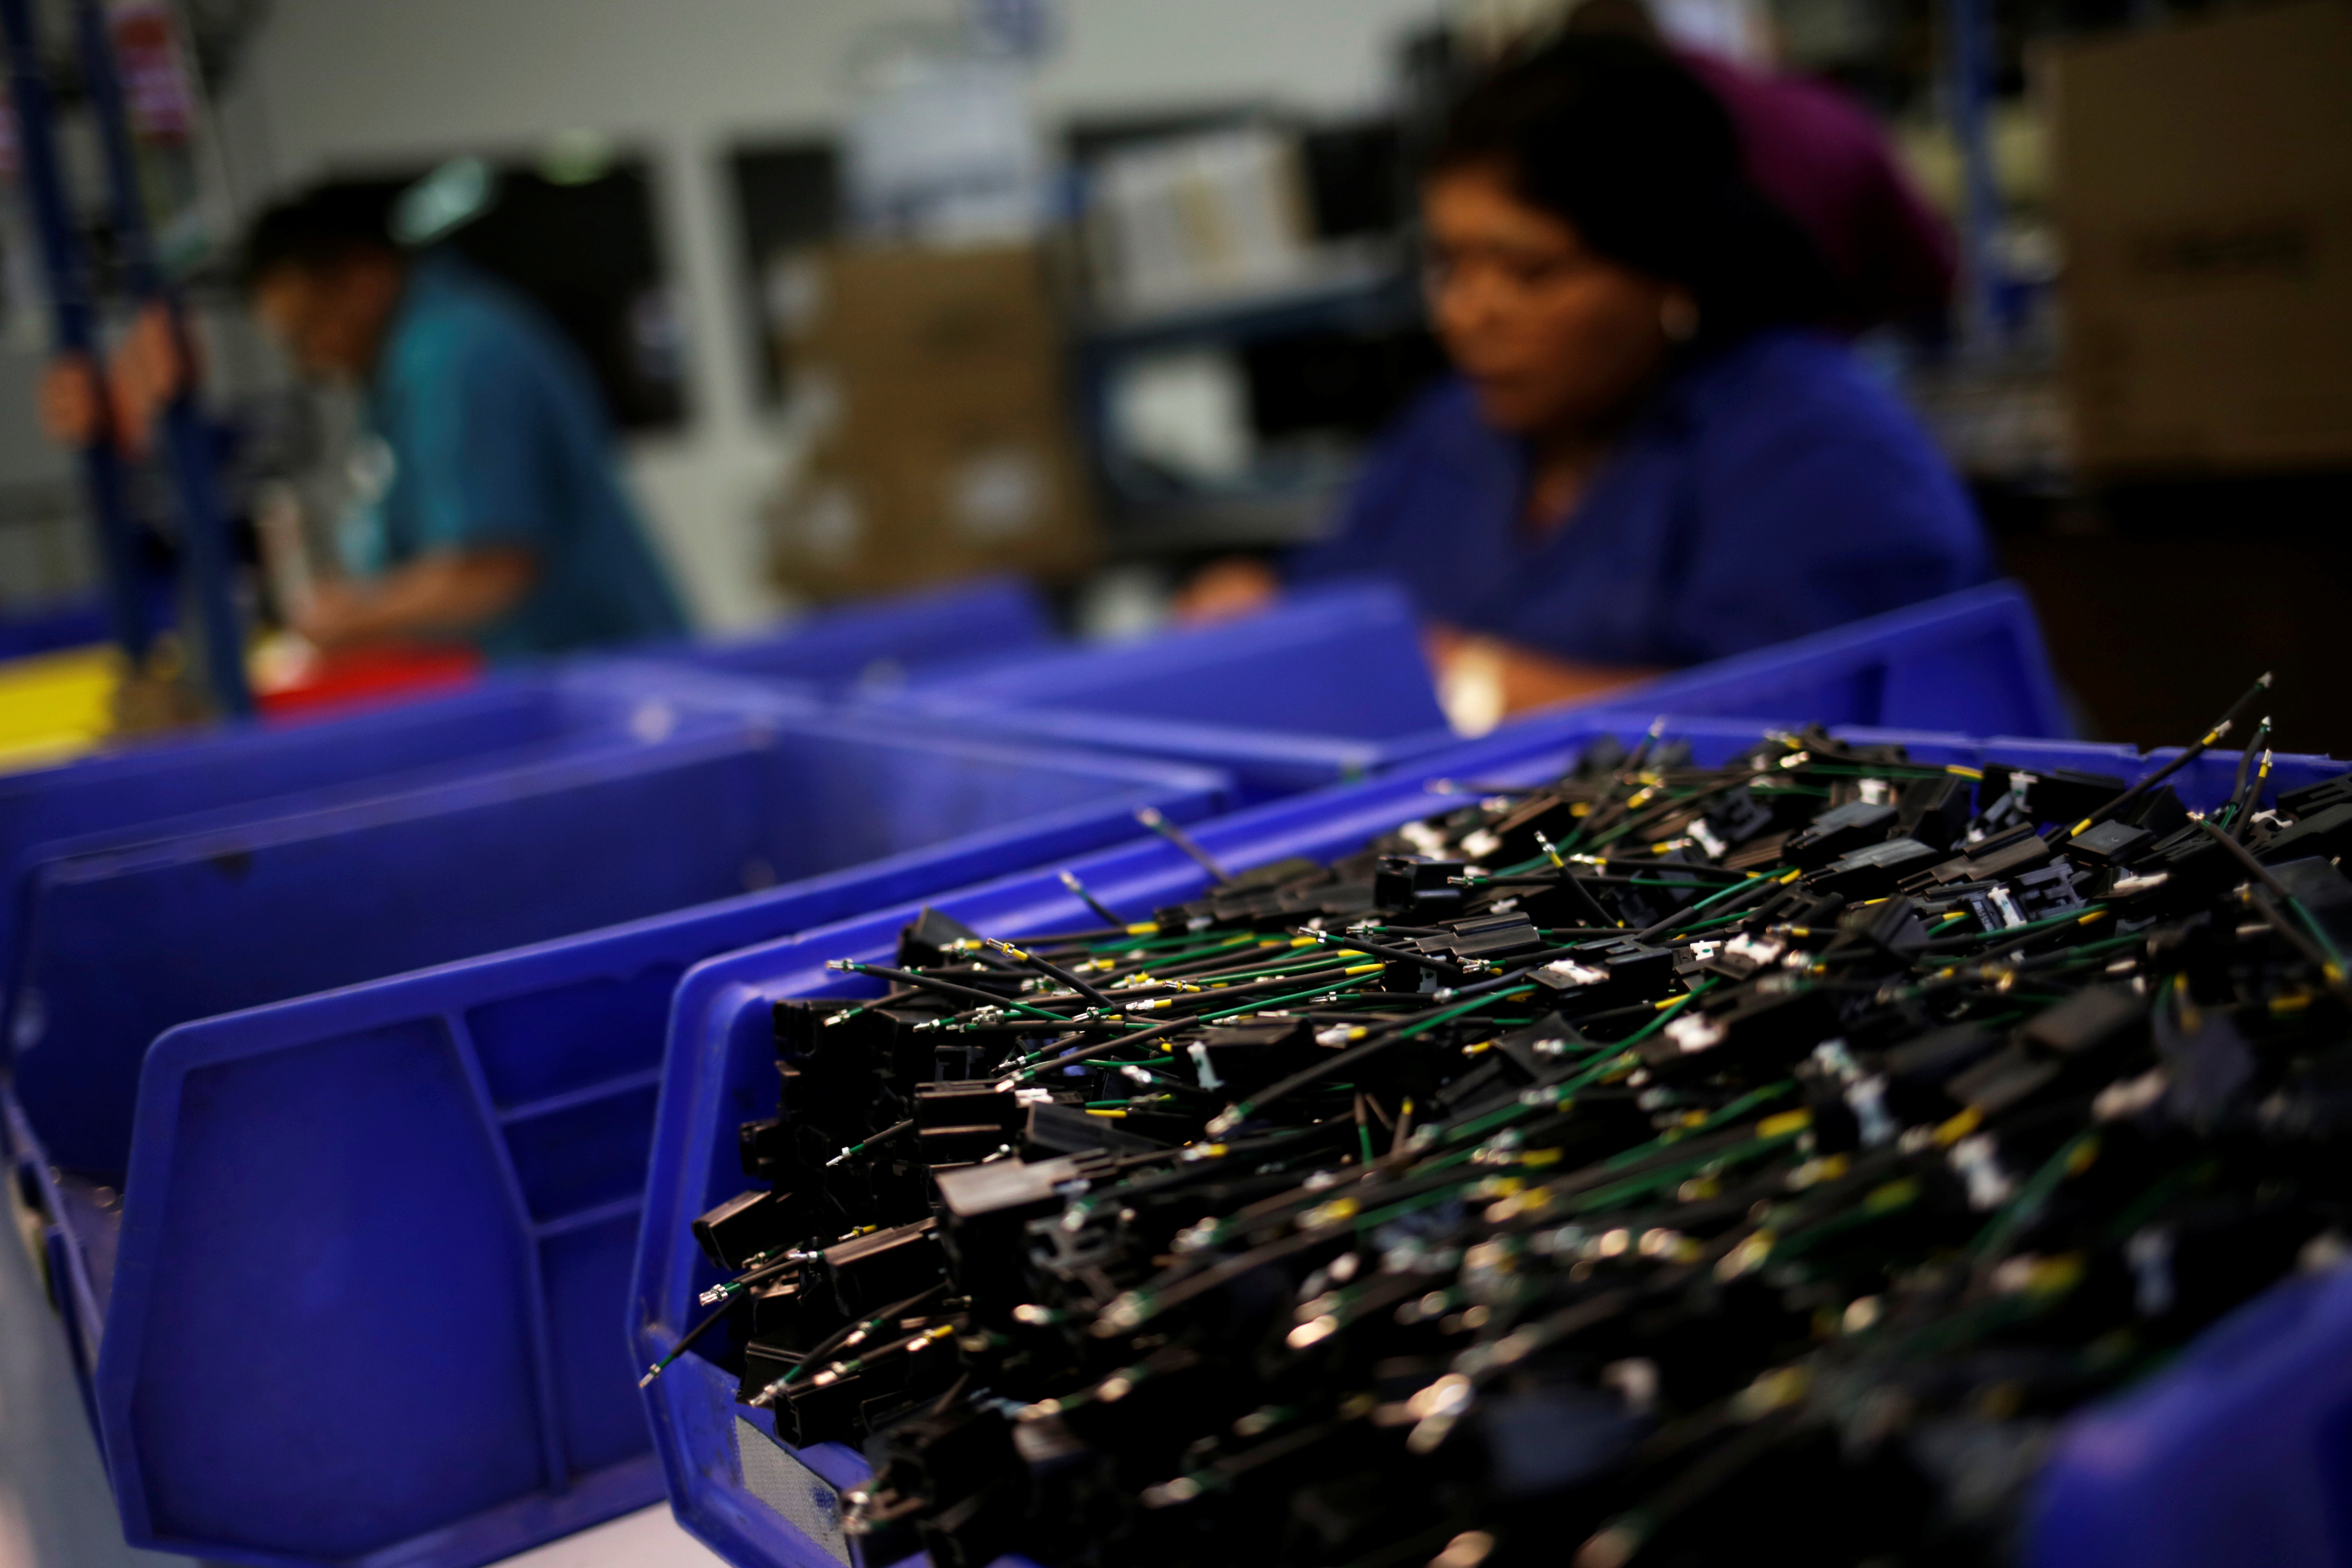 An operator works at a wire harness and cable manufacturing plant as the fast-spreading coronavirus outbreak has rippled through the global economy and upended supply chains, in Ciudad Juarez